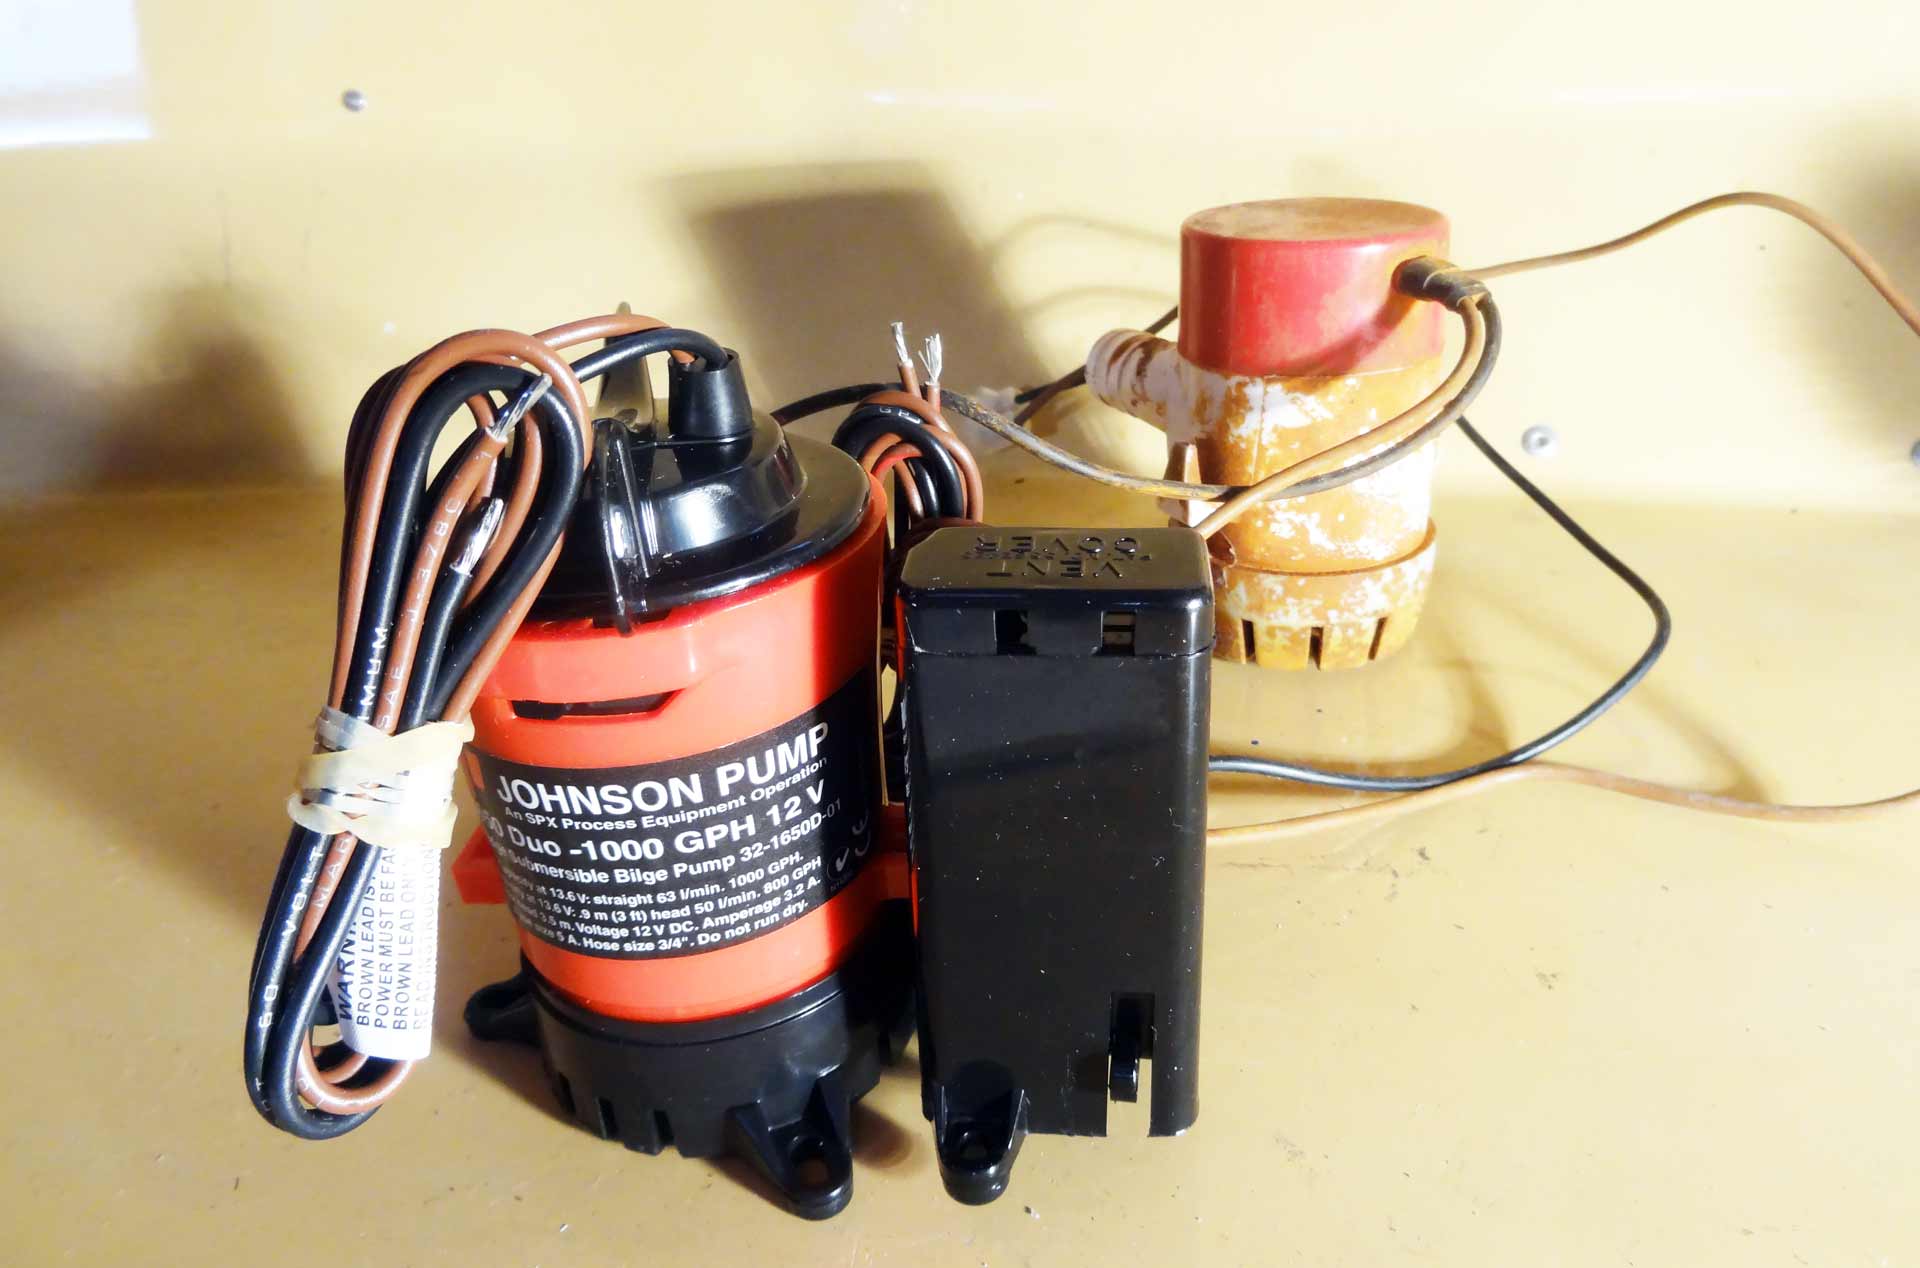 The old and too small pump will be replaced by a brand-new Johnson Bilge Pump